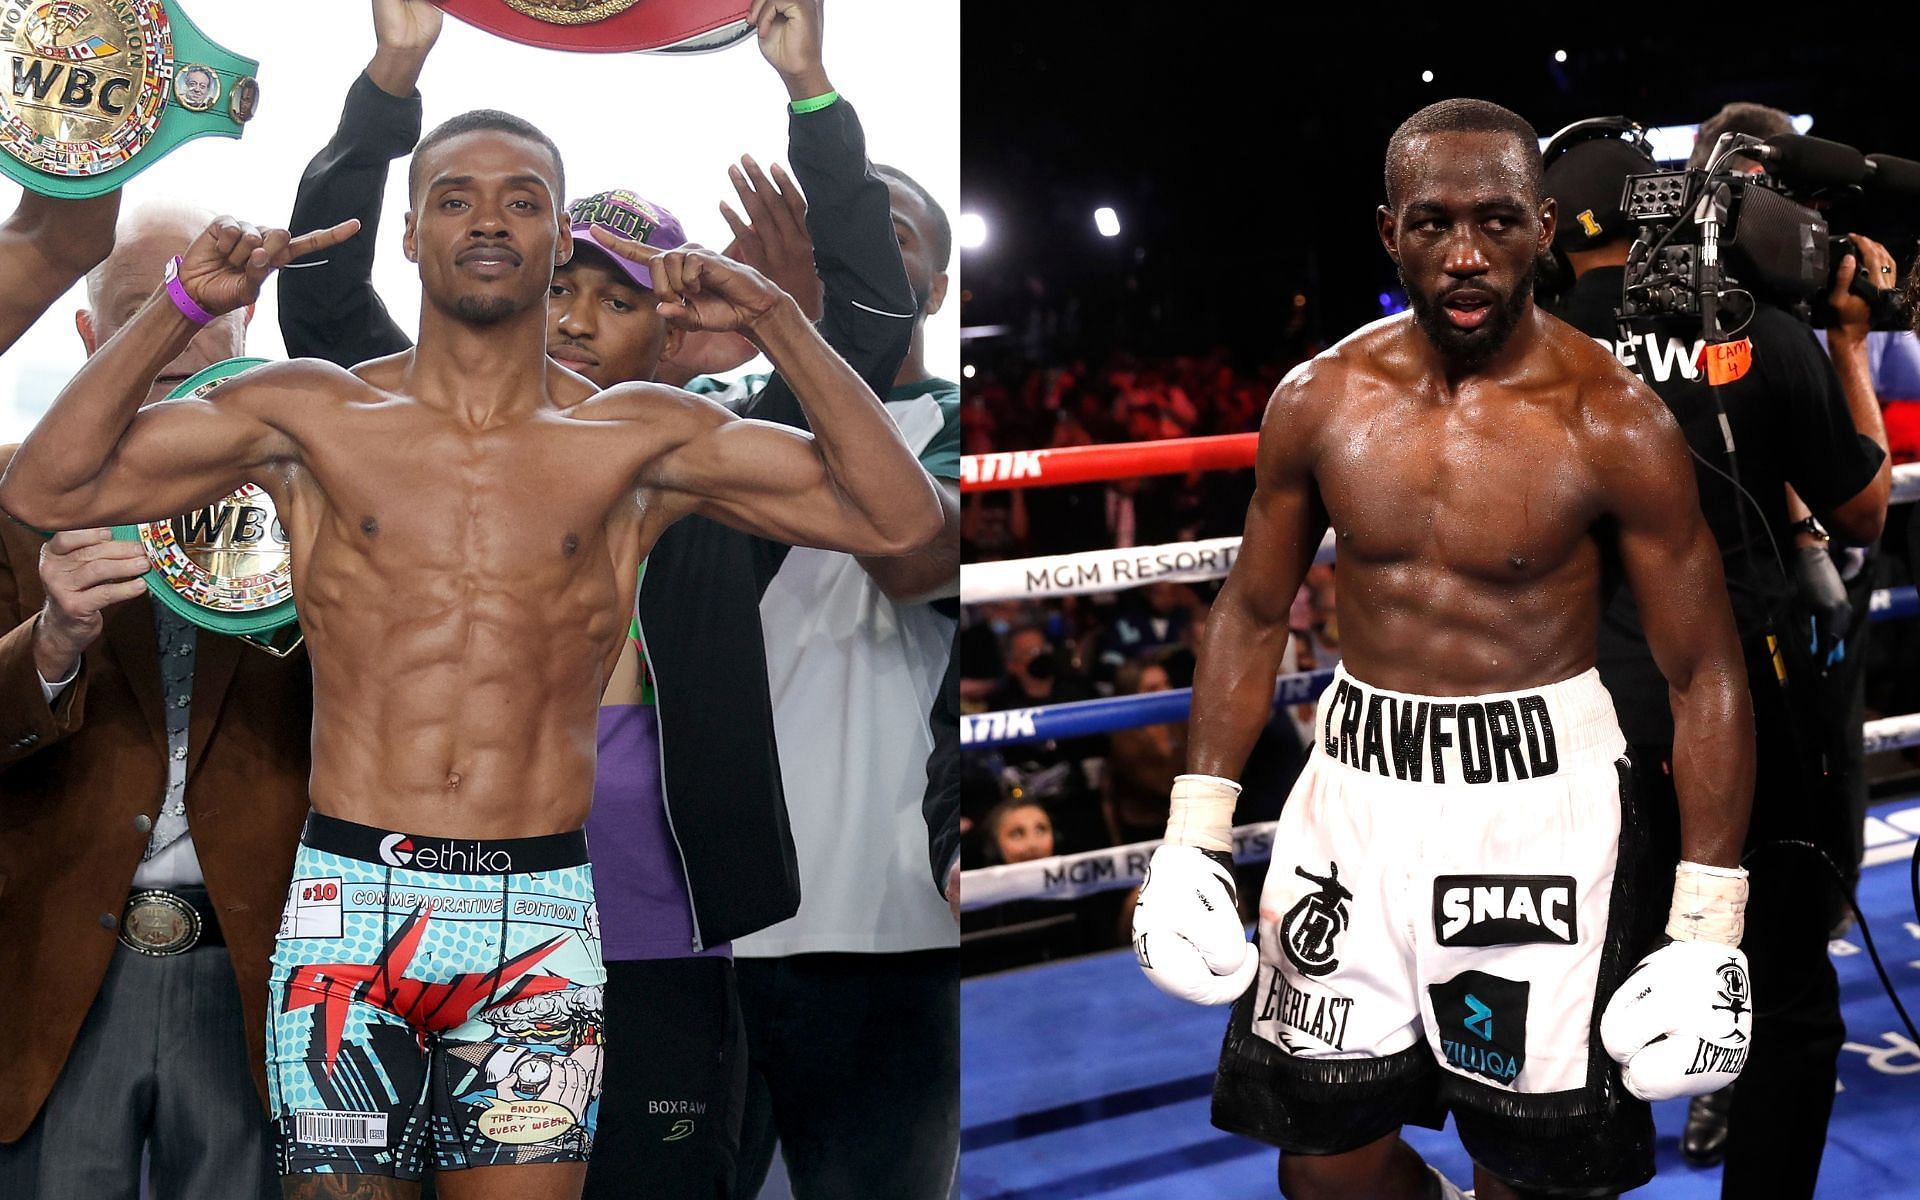 Errol Spence Jr. (left) and Terence Crawford (right) (Image credits Getty Images)